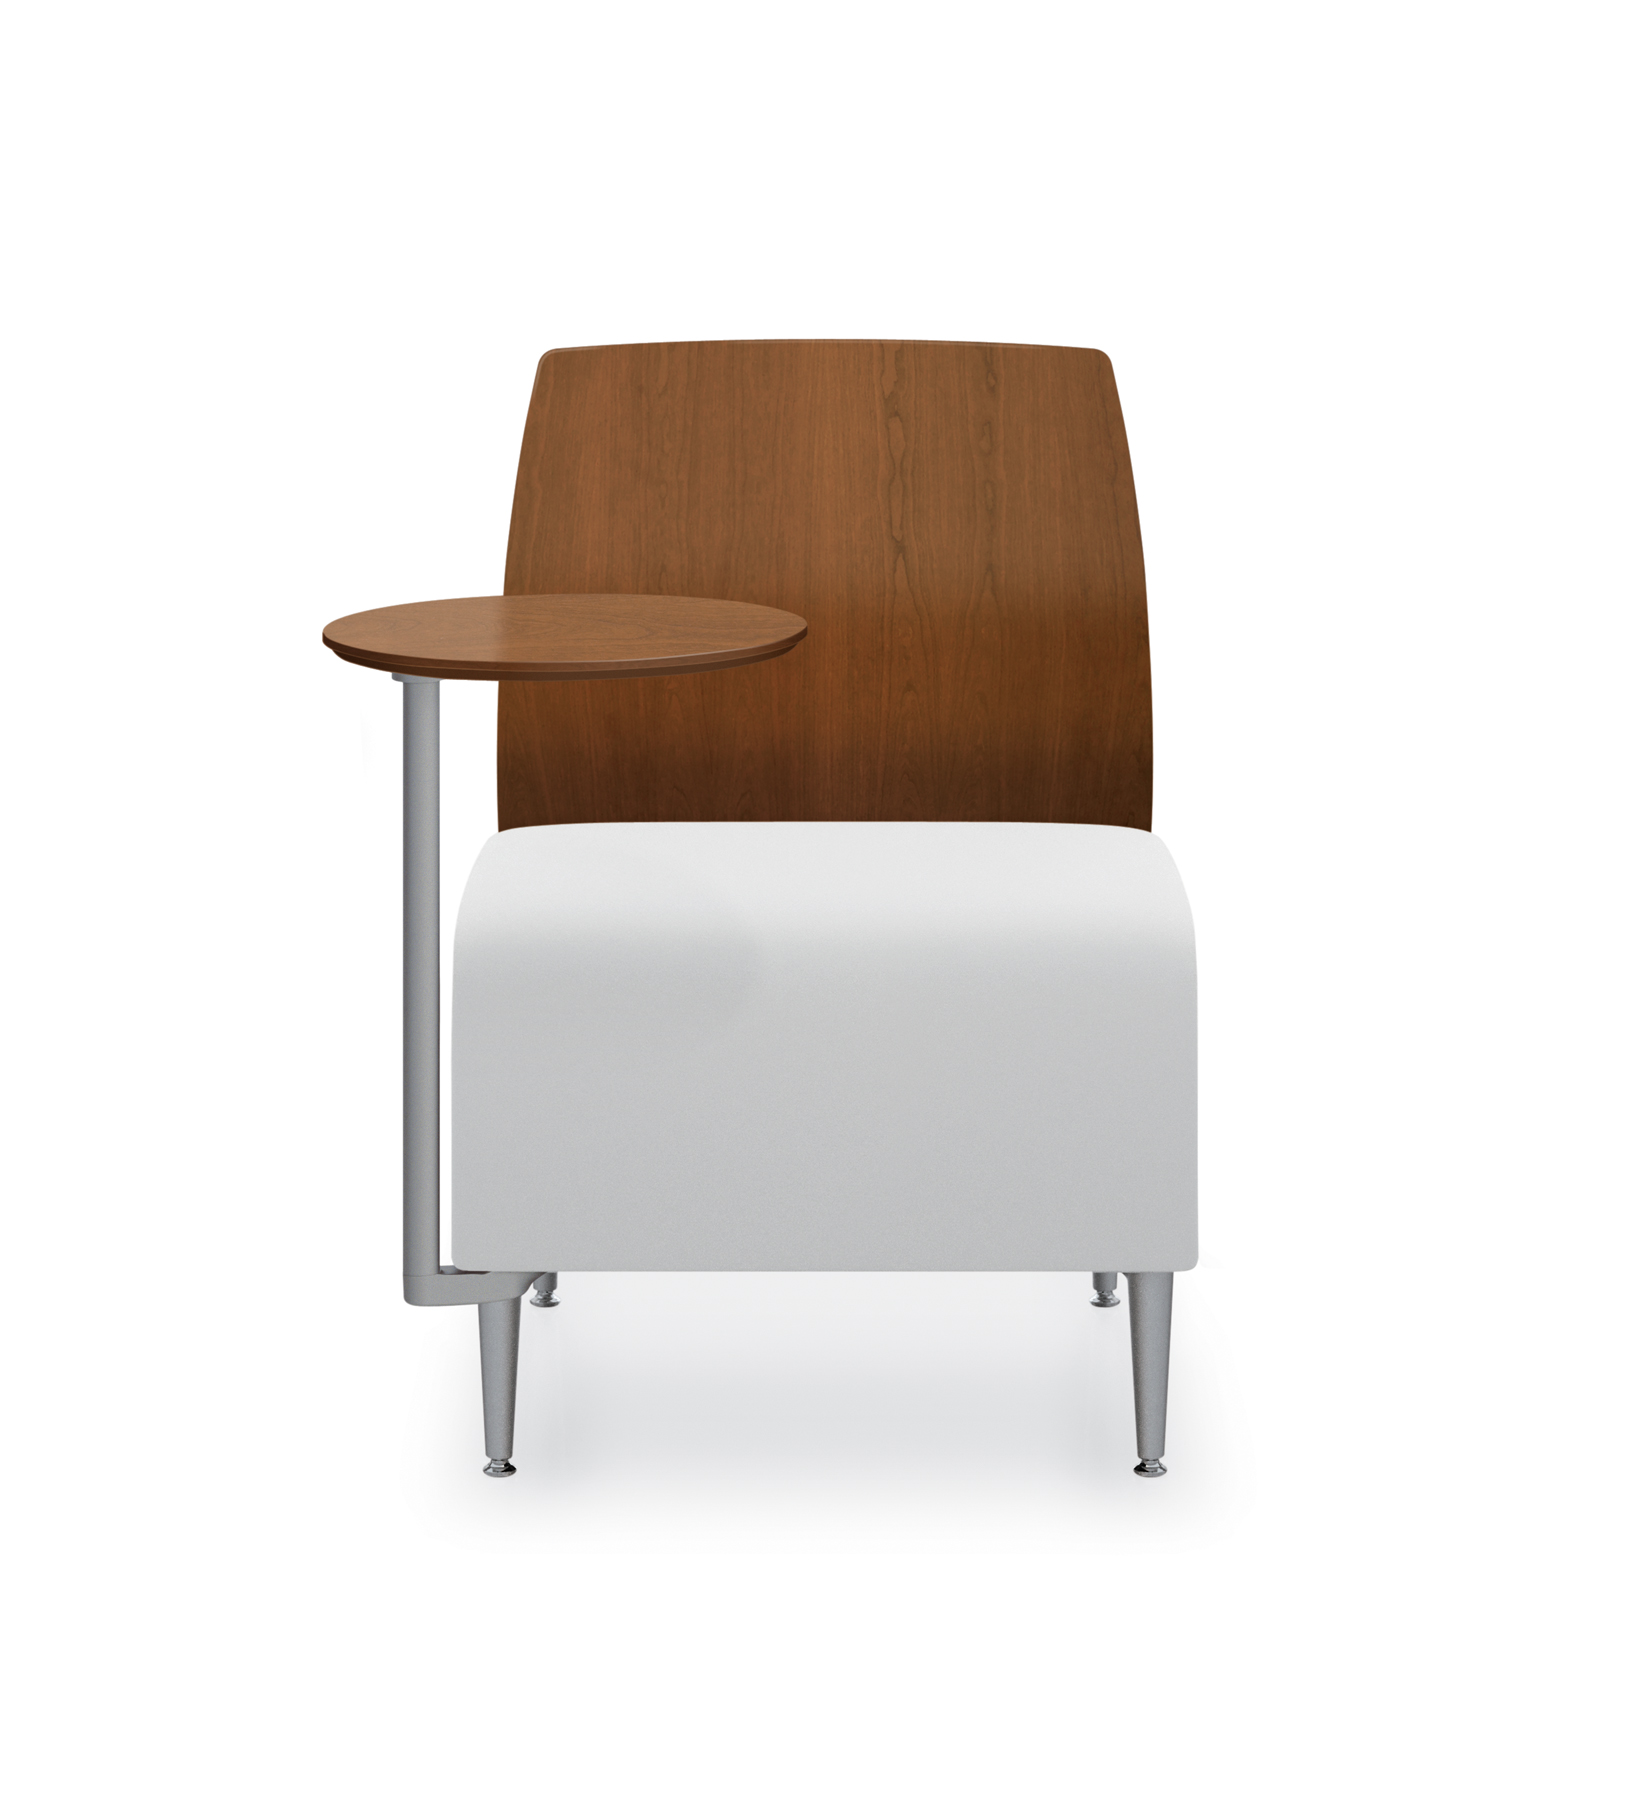 Zola single modular chair with wood back & tablet